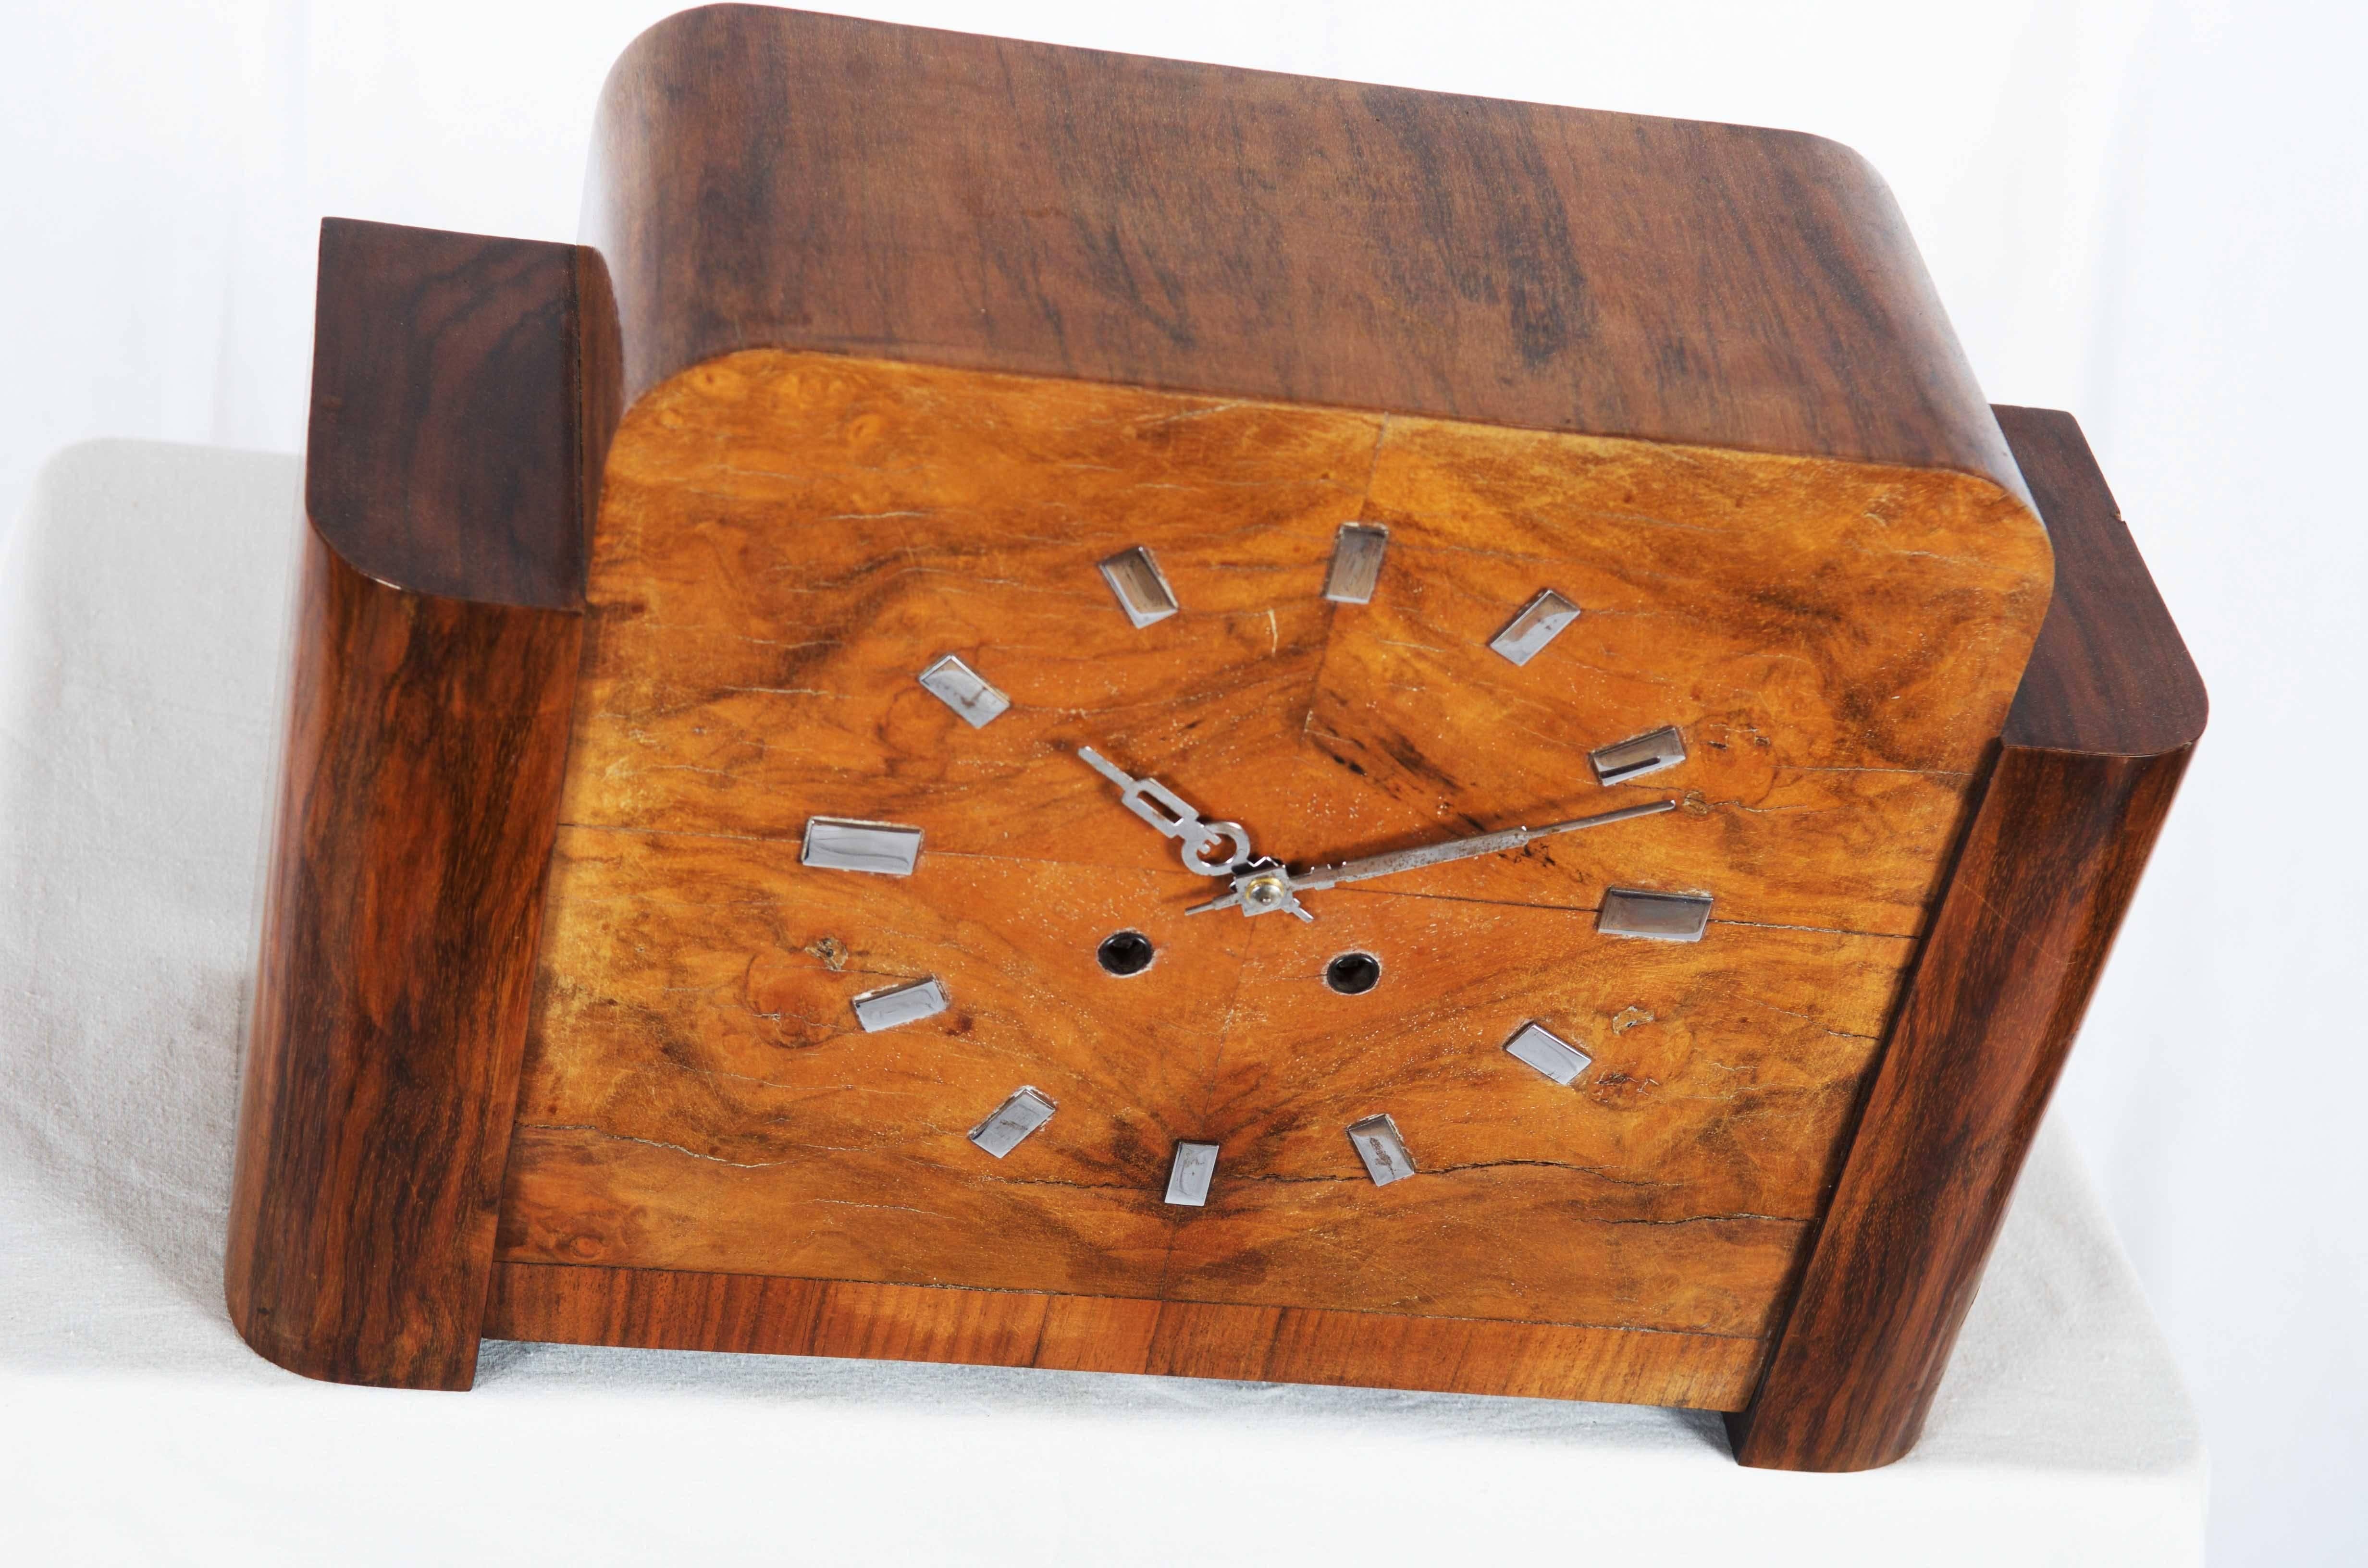  Softwood with nut veneer, chromed clock-face
Stil in original condition with new springs in fully working condition.